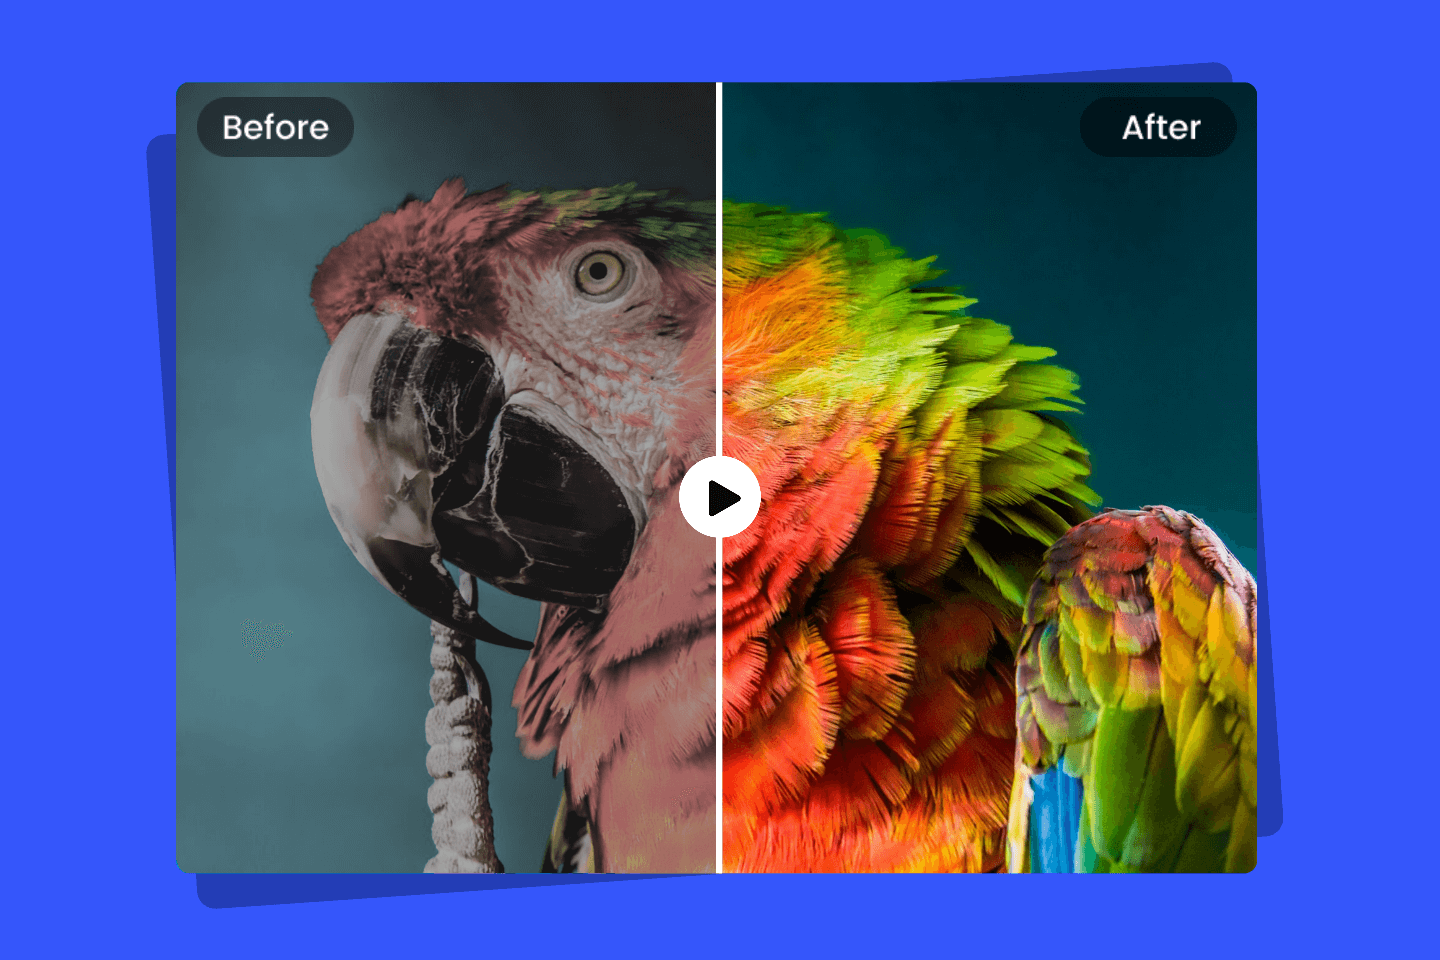 Video color correction makes the parrot look more vibrant